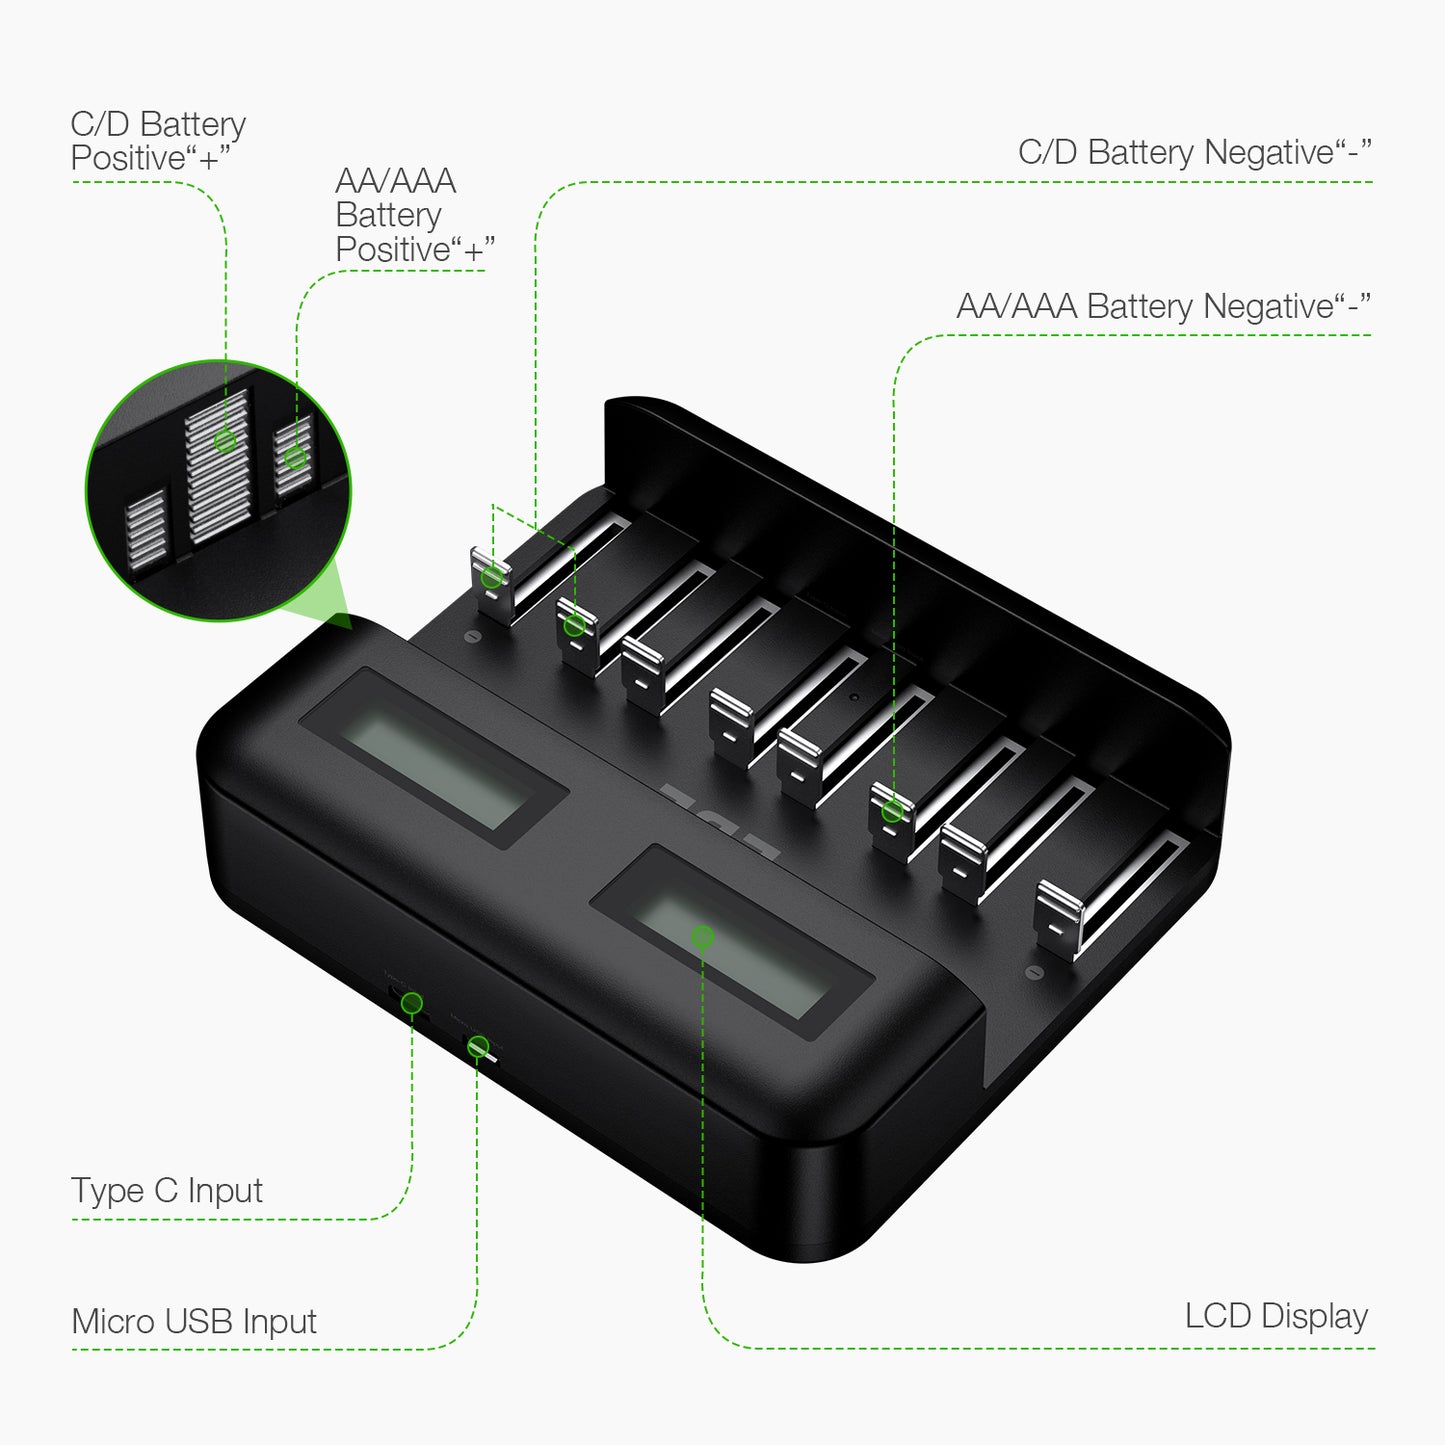 EBL TB-6431 8-Bay Universal Battery Charger with LCD Status Display, Independently Controlled Quick Charging Slots, and Built-In Overcharge Protection for AA AAA C D Rechargeable Batteries